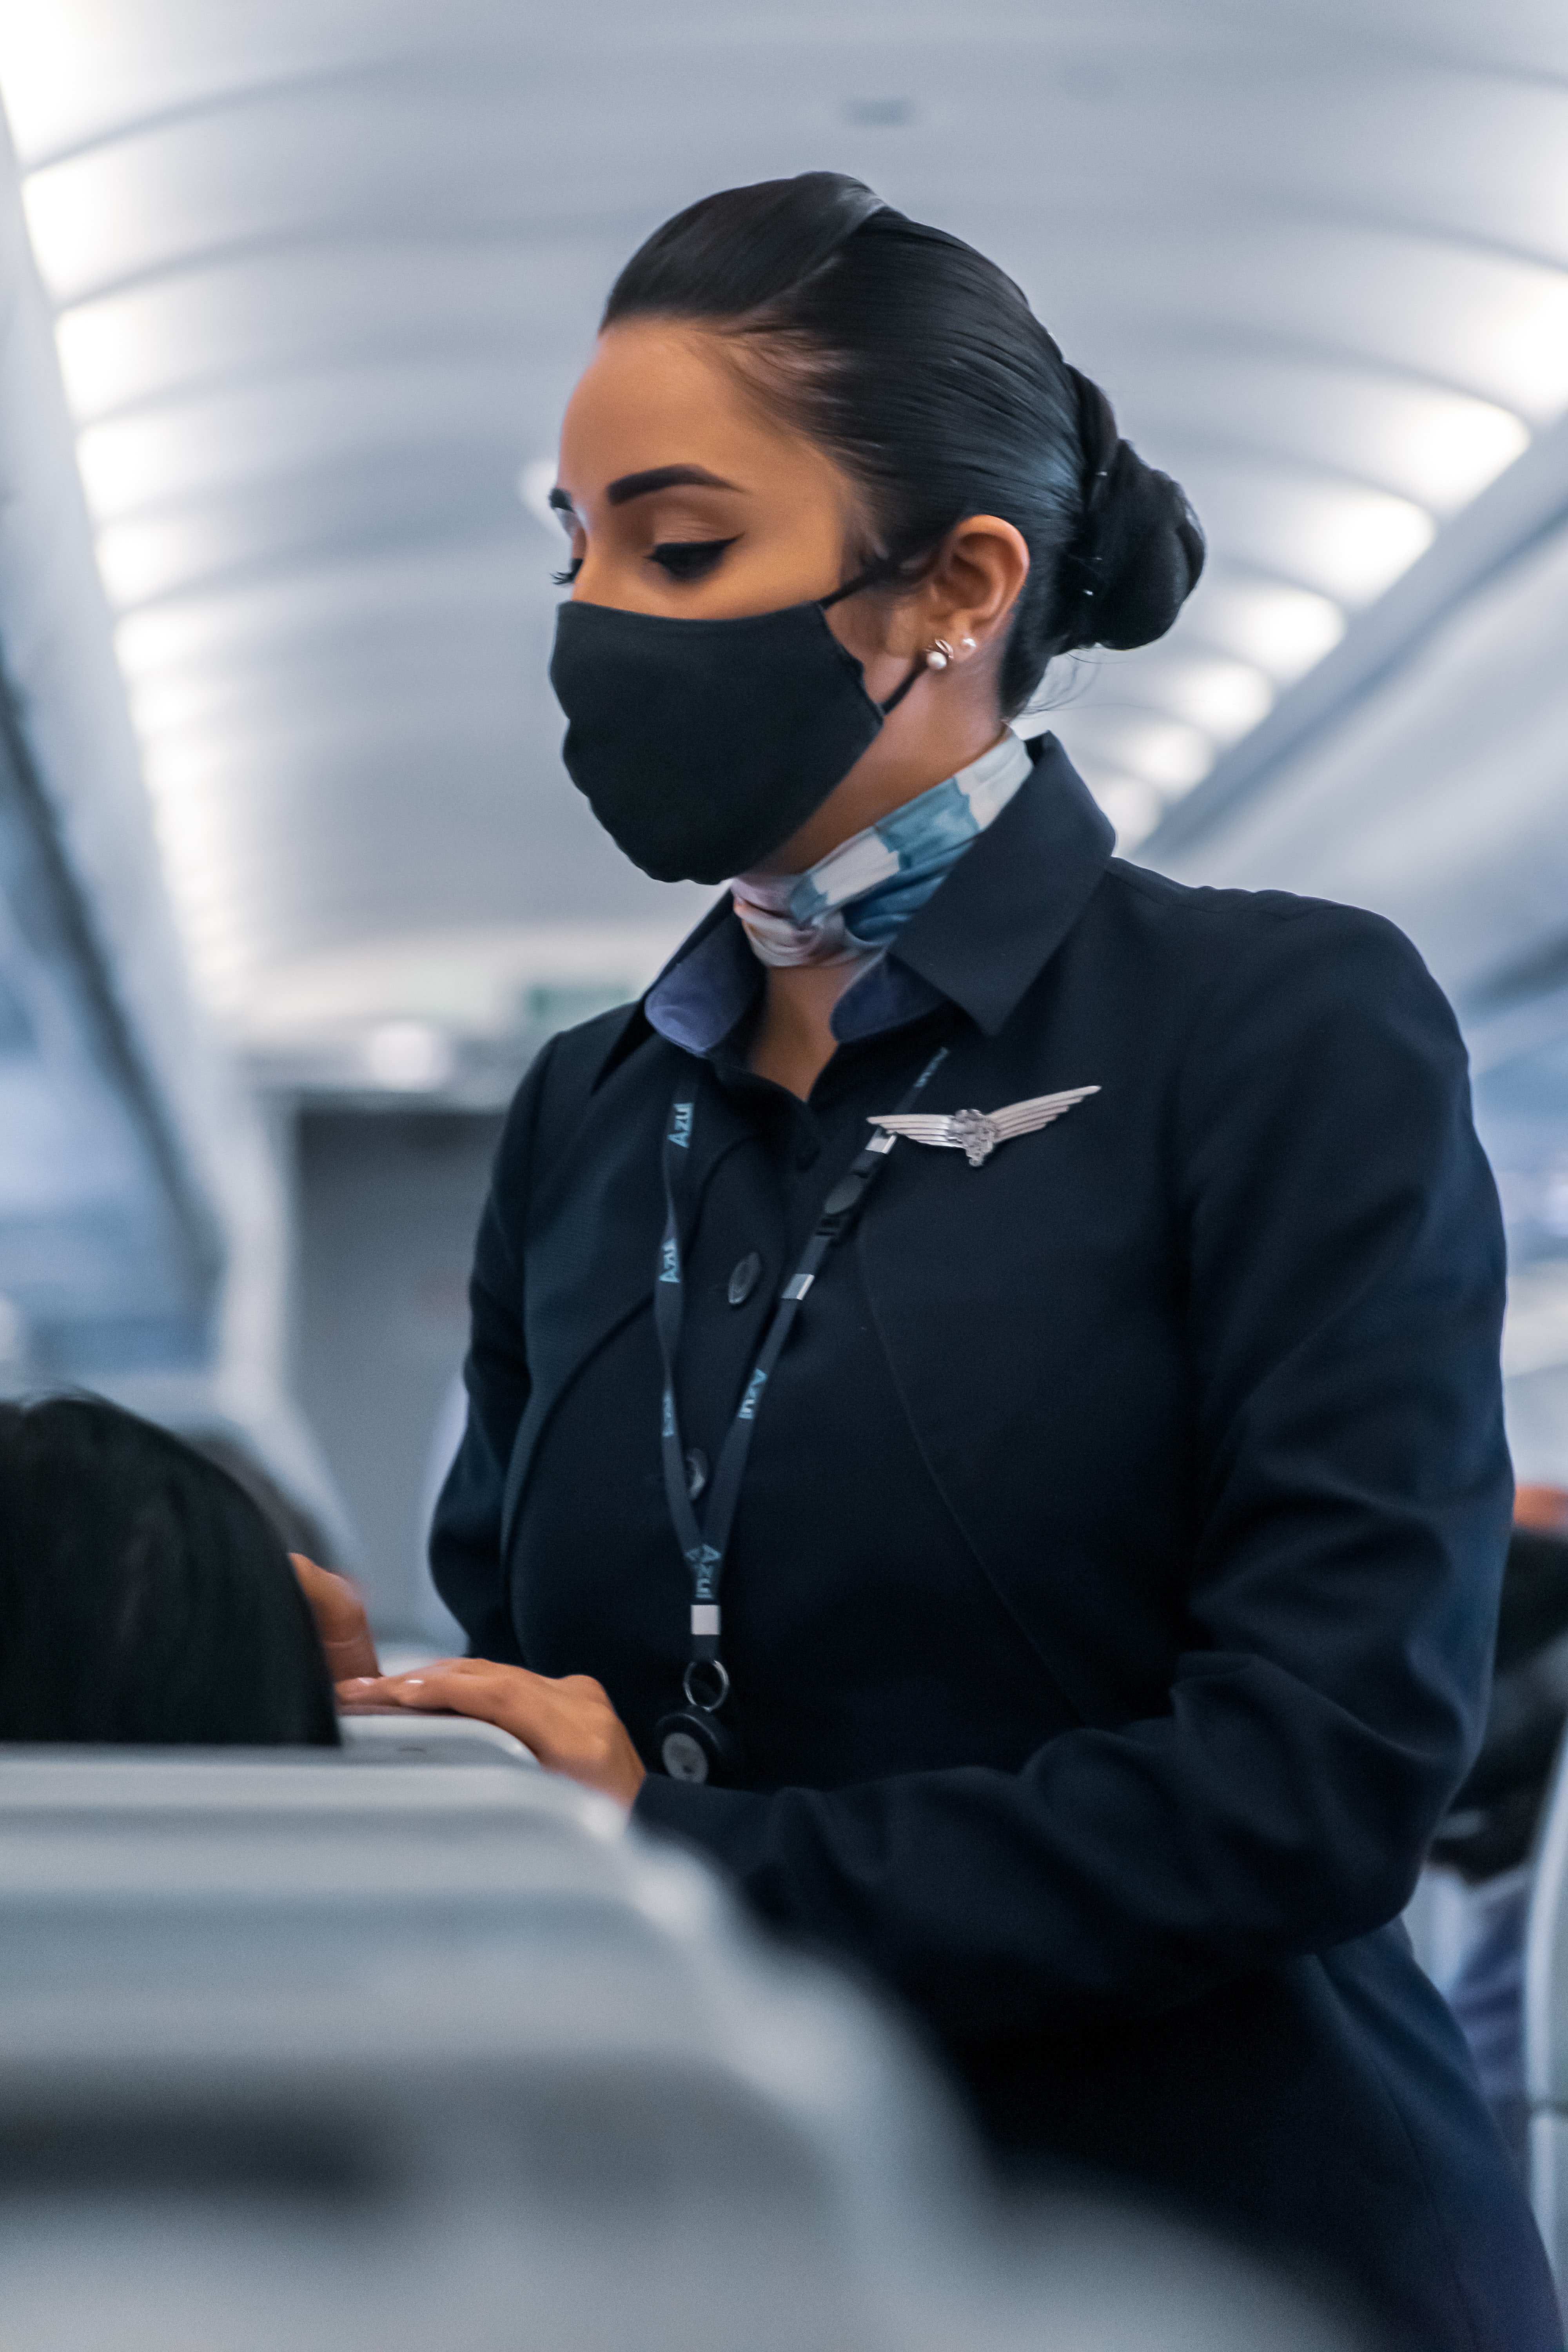 The flight attendant looked a bit mortified at the man's tone | Source: Unsplash